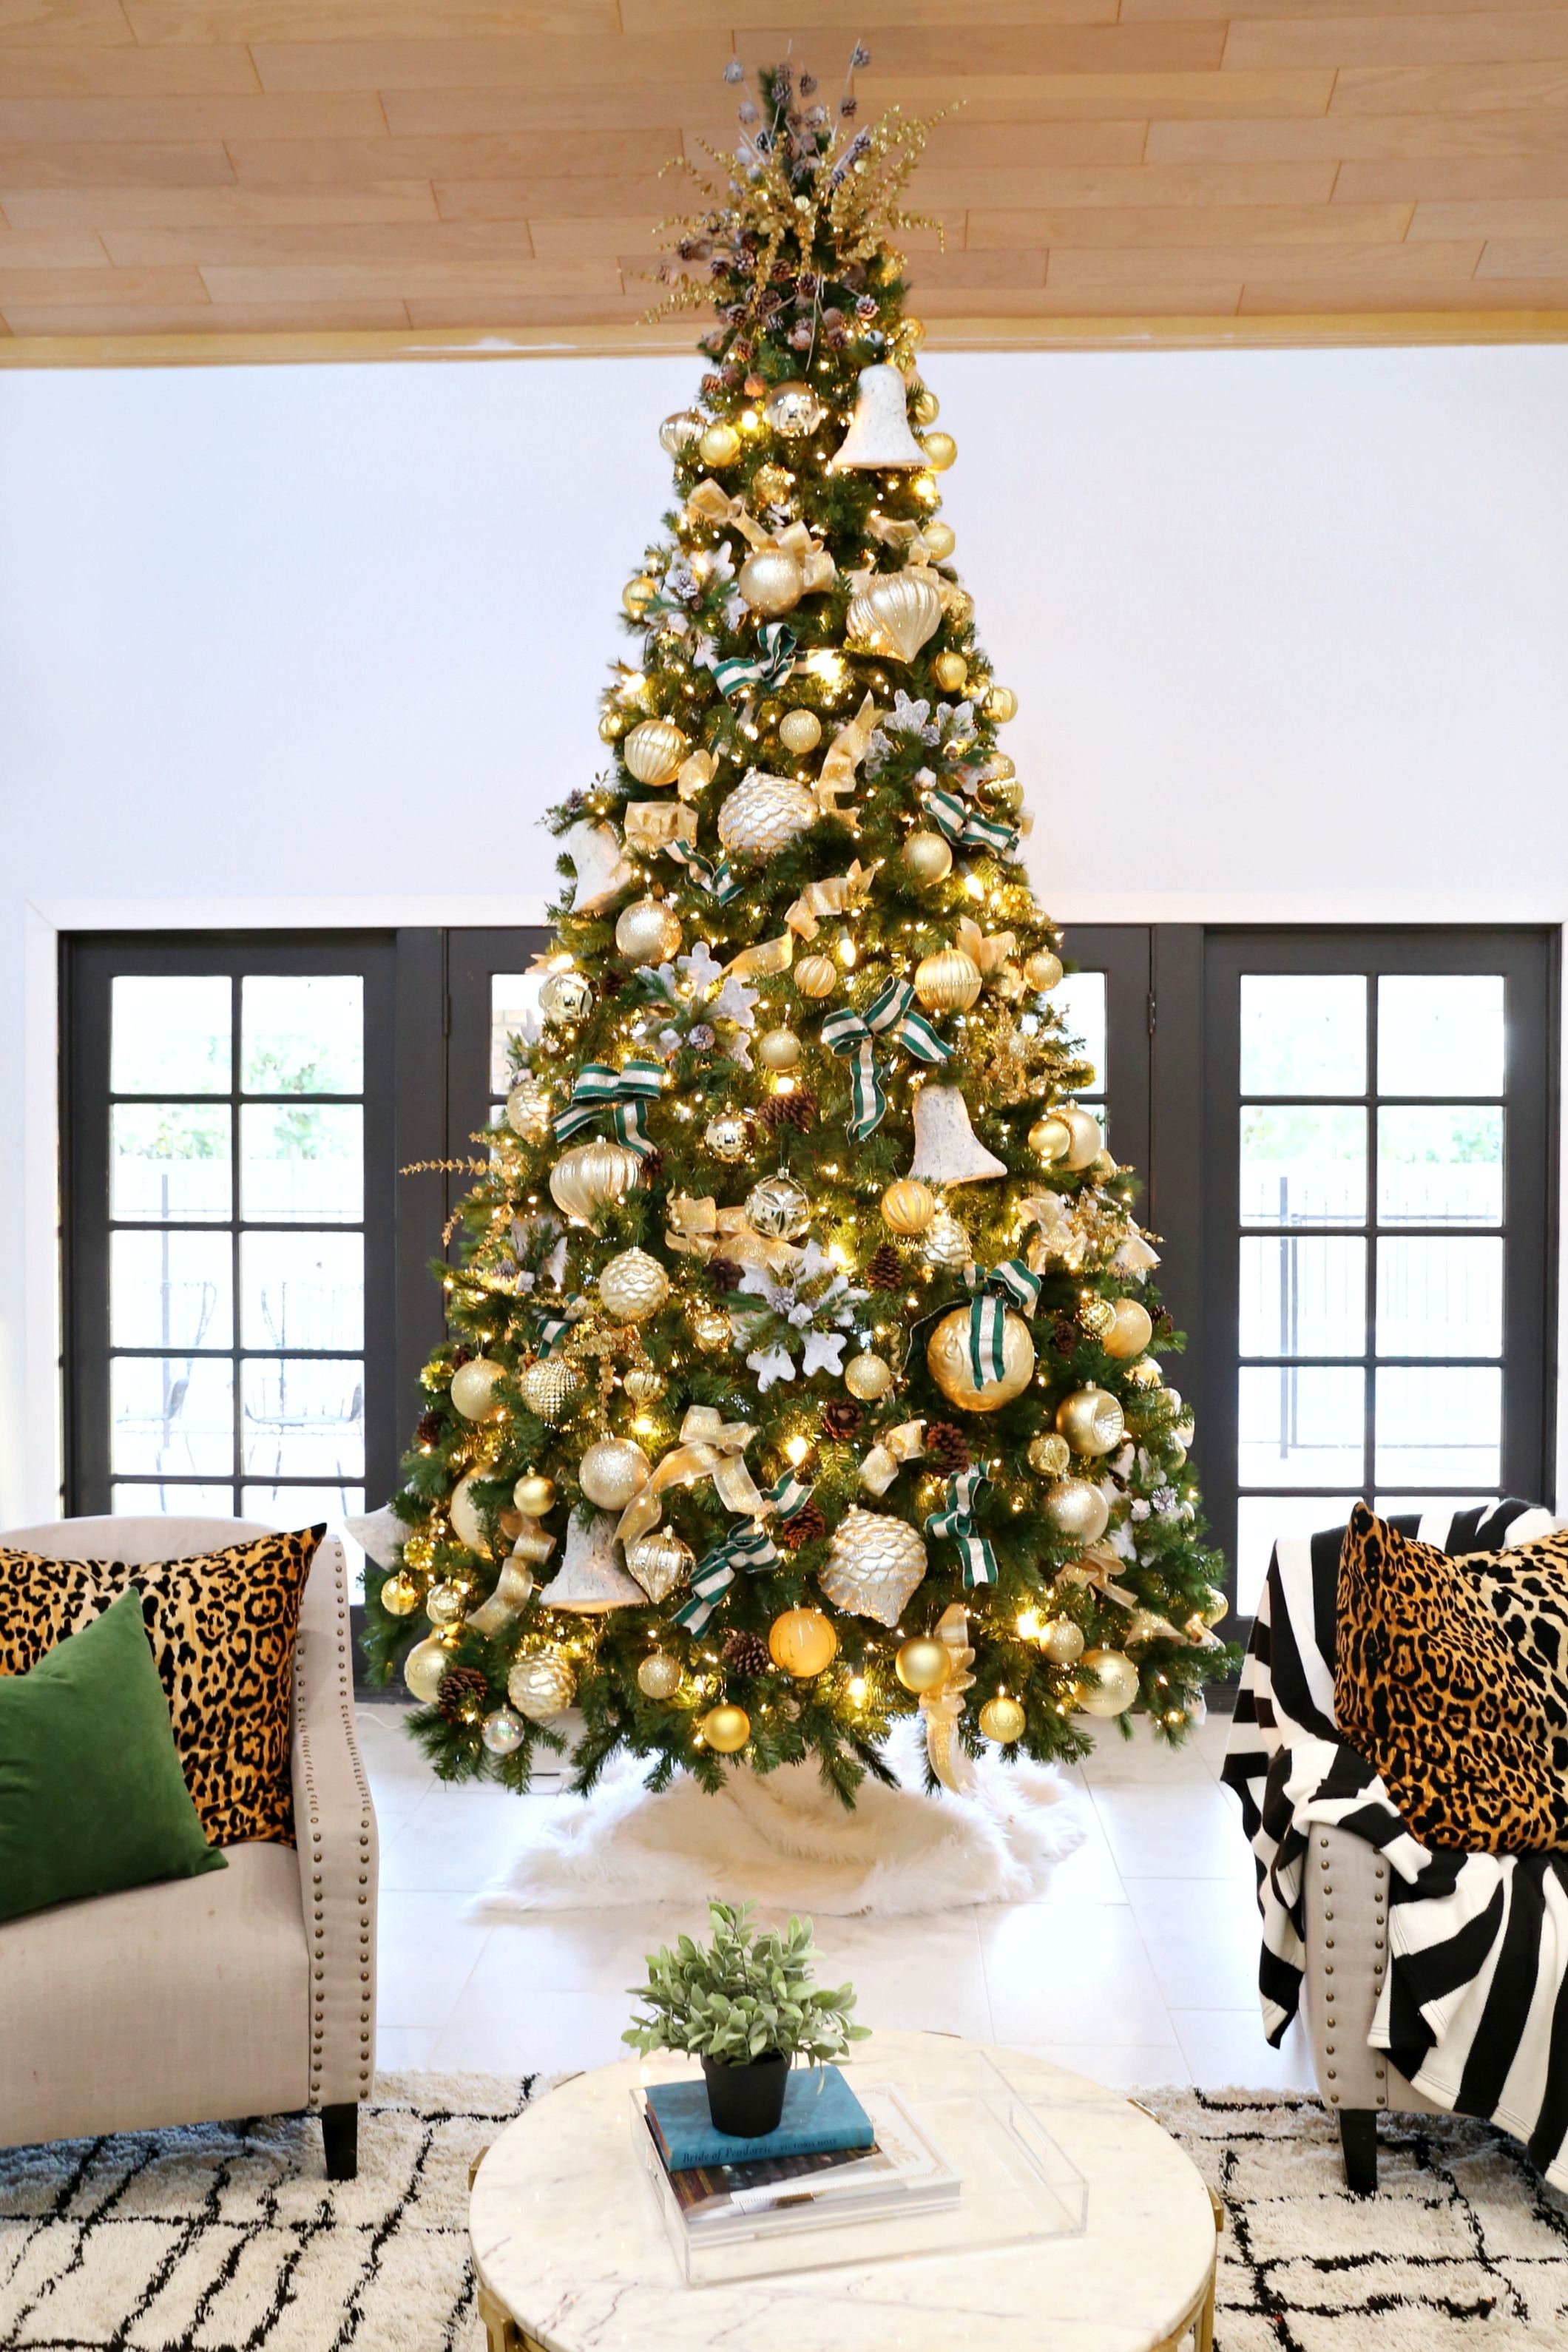 This elegant Christmas tree beautifully mixes oversize ornaments  with